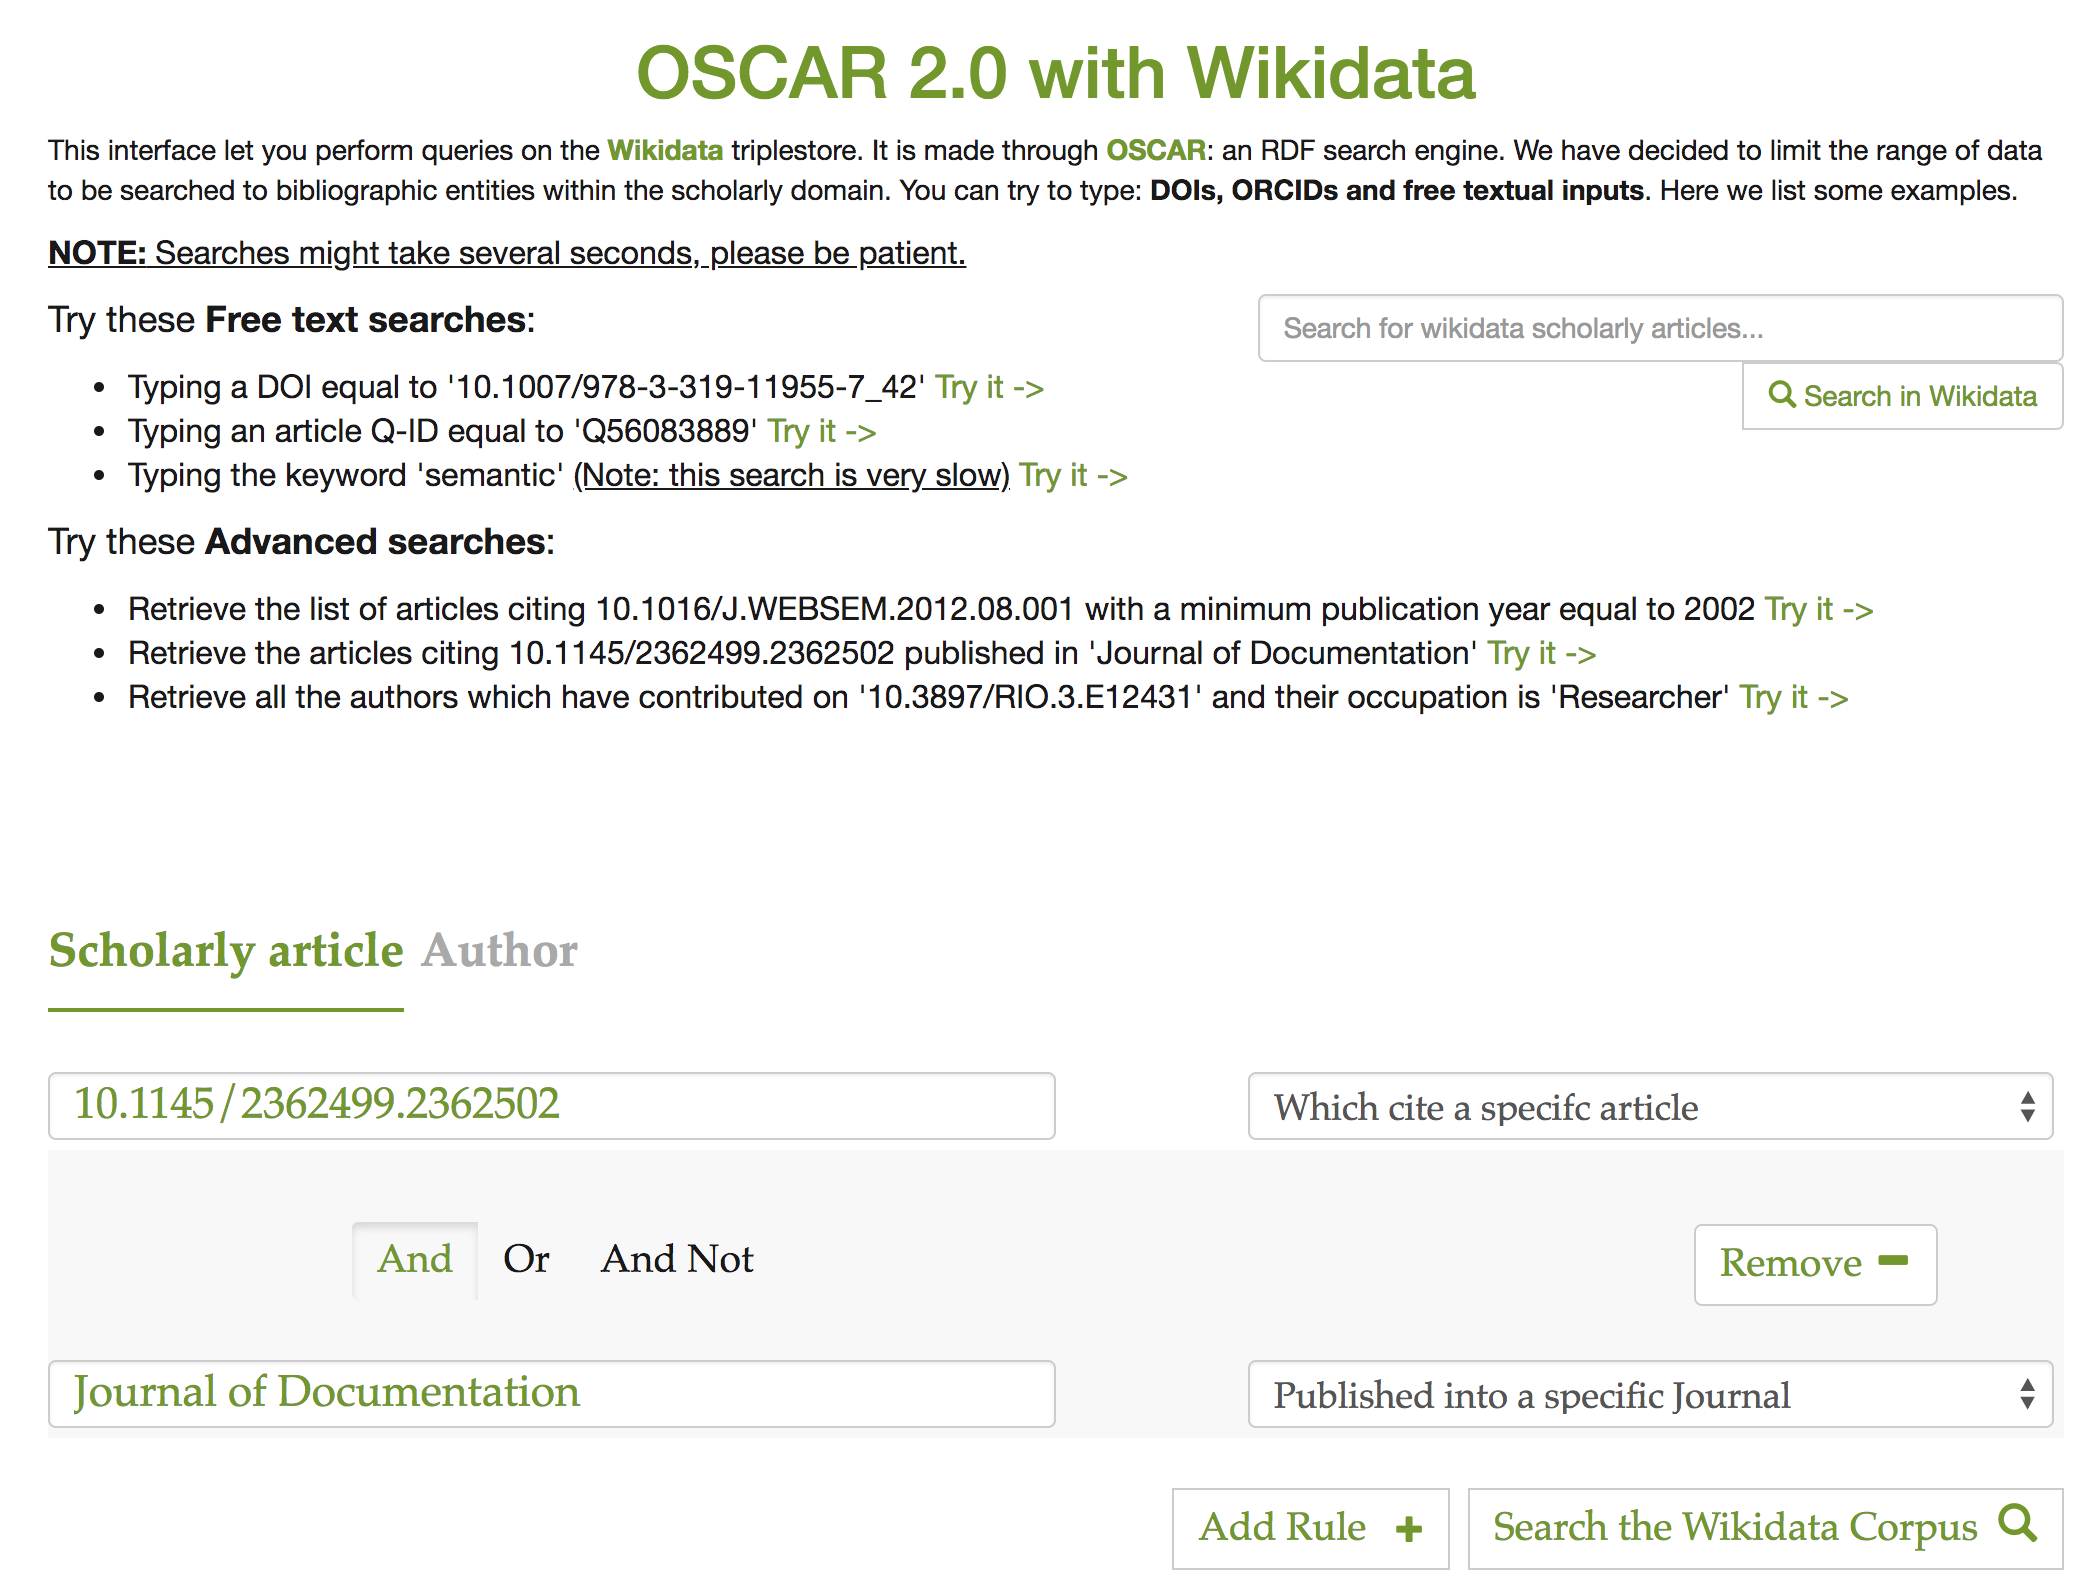 The OSCAR interface for querying the Wikidata scholarly documents. On the top right of the page we have an input box dedicated for the free-text search, while on the bottom we have advanced search dedicated section. The query written in the interface asks to retrieve all the articles citing “10.1145/2362499.2362502” published in “Journal of Documentation”.